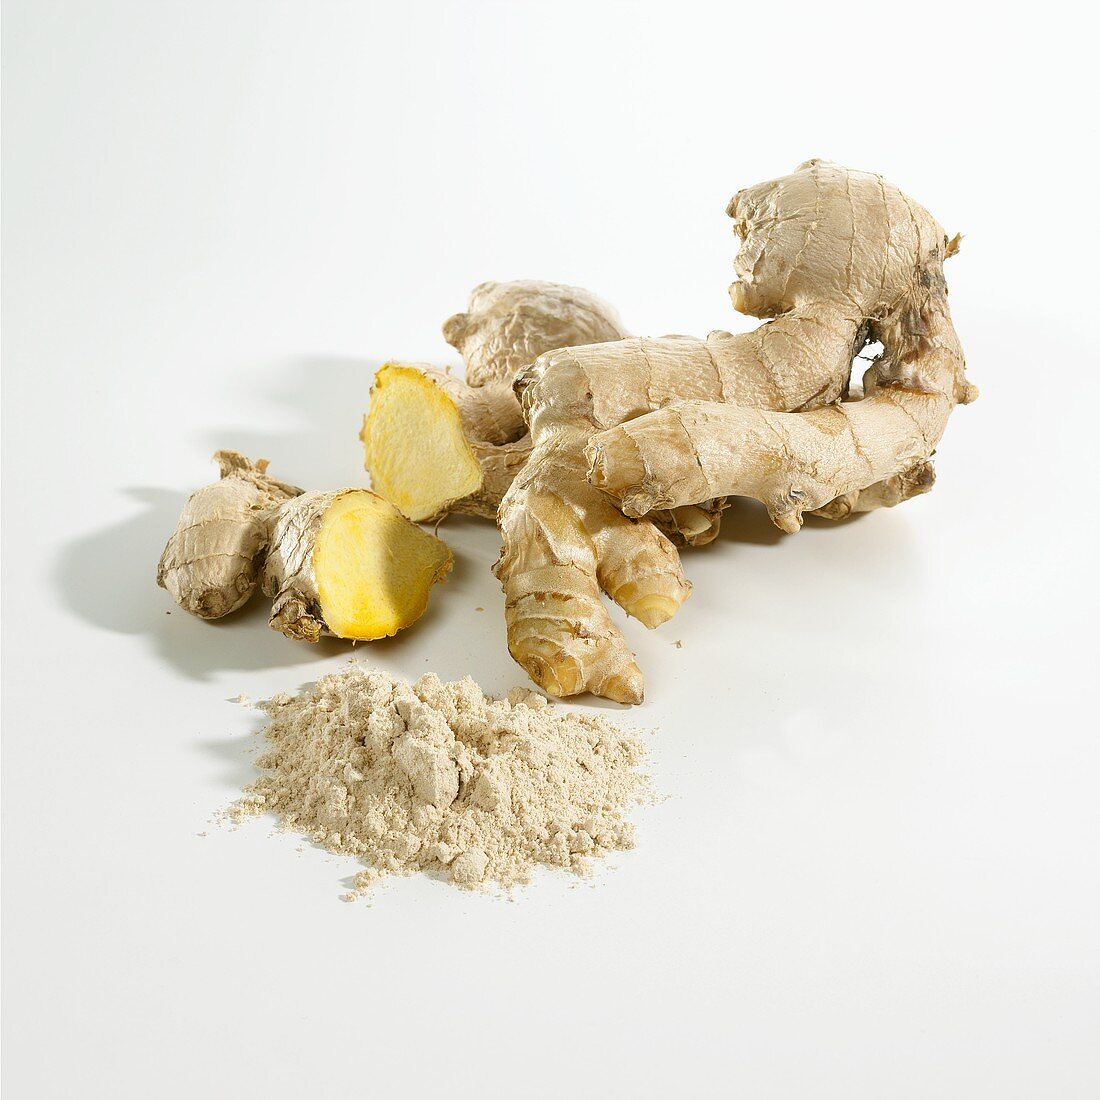 Fresh ginger root and ground ginger